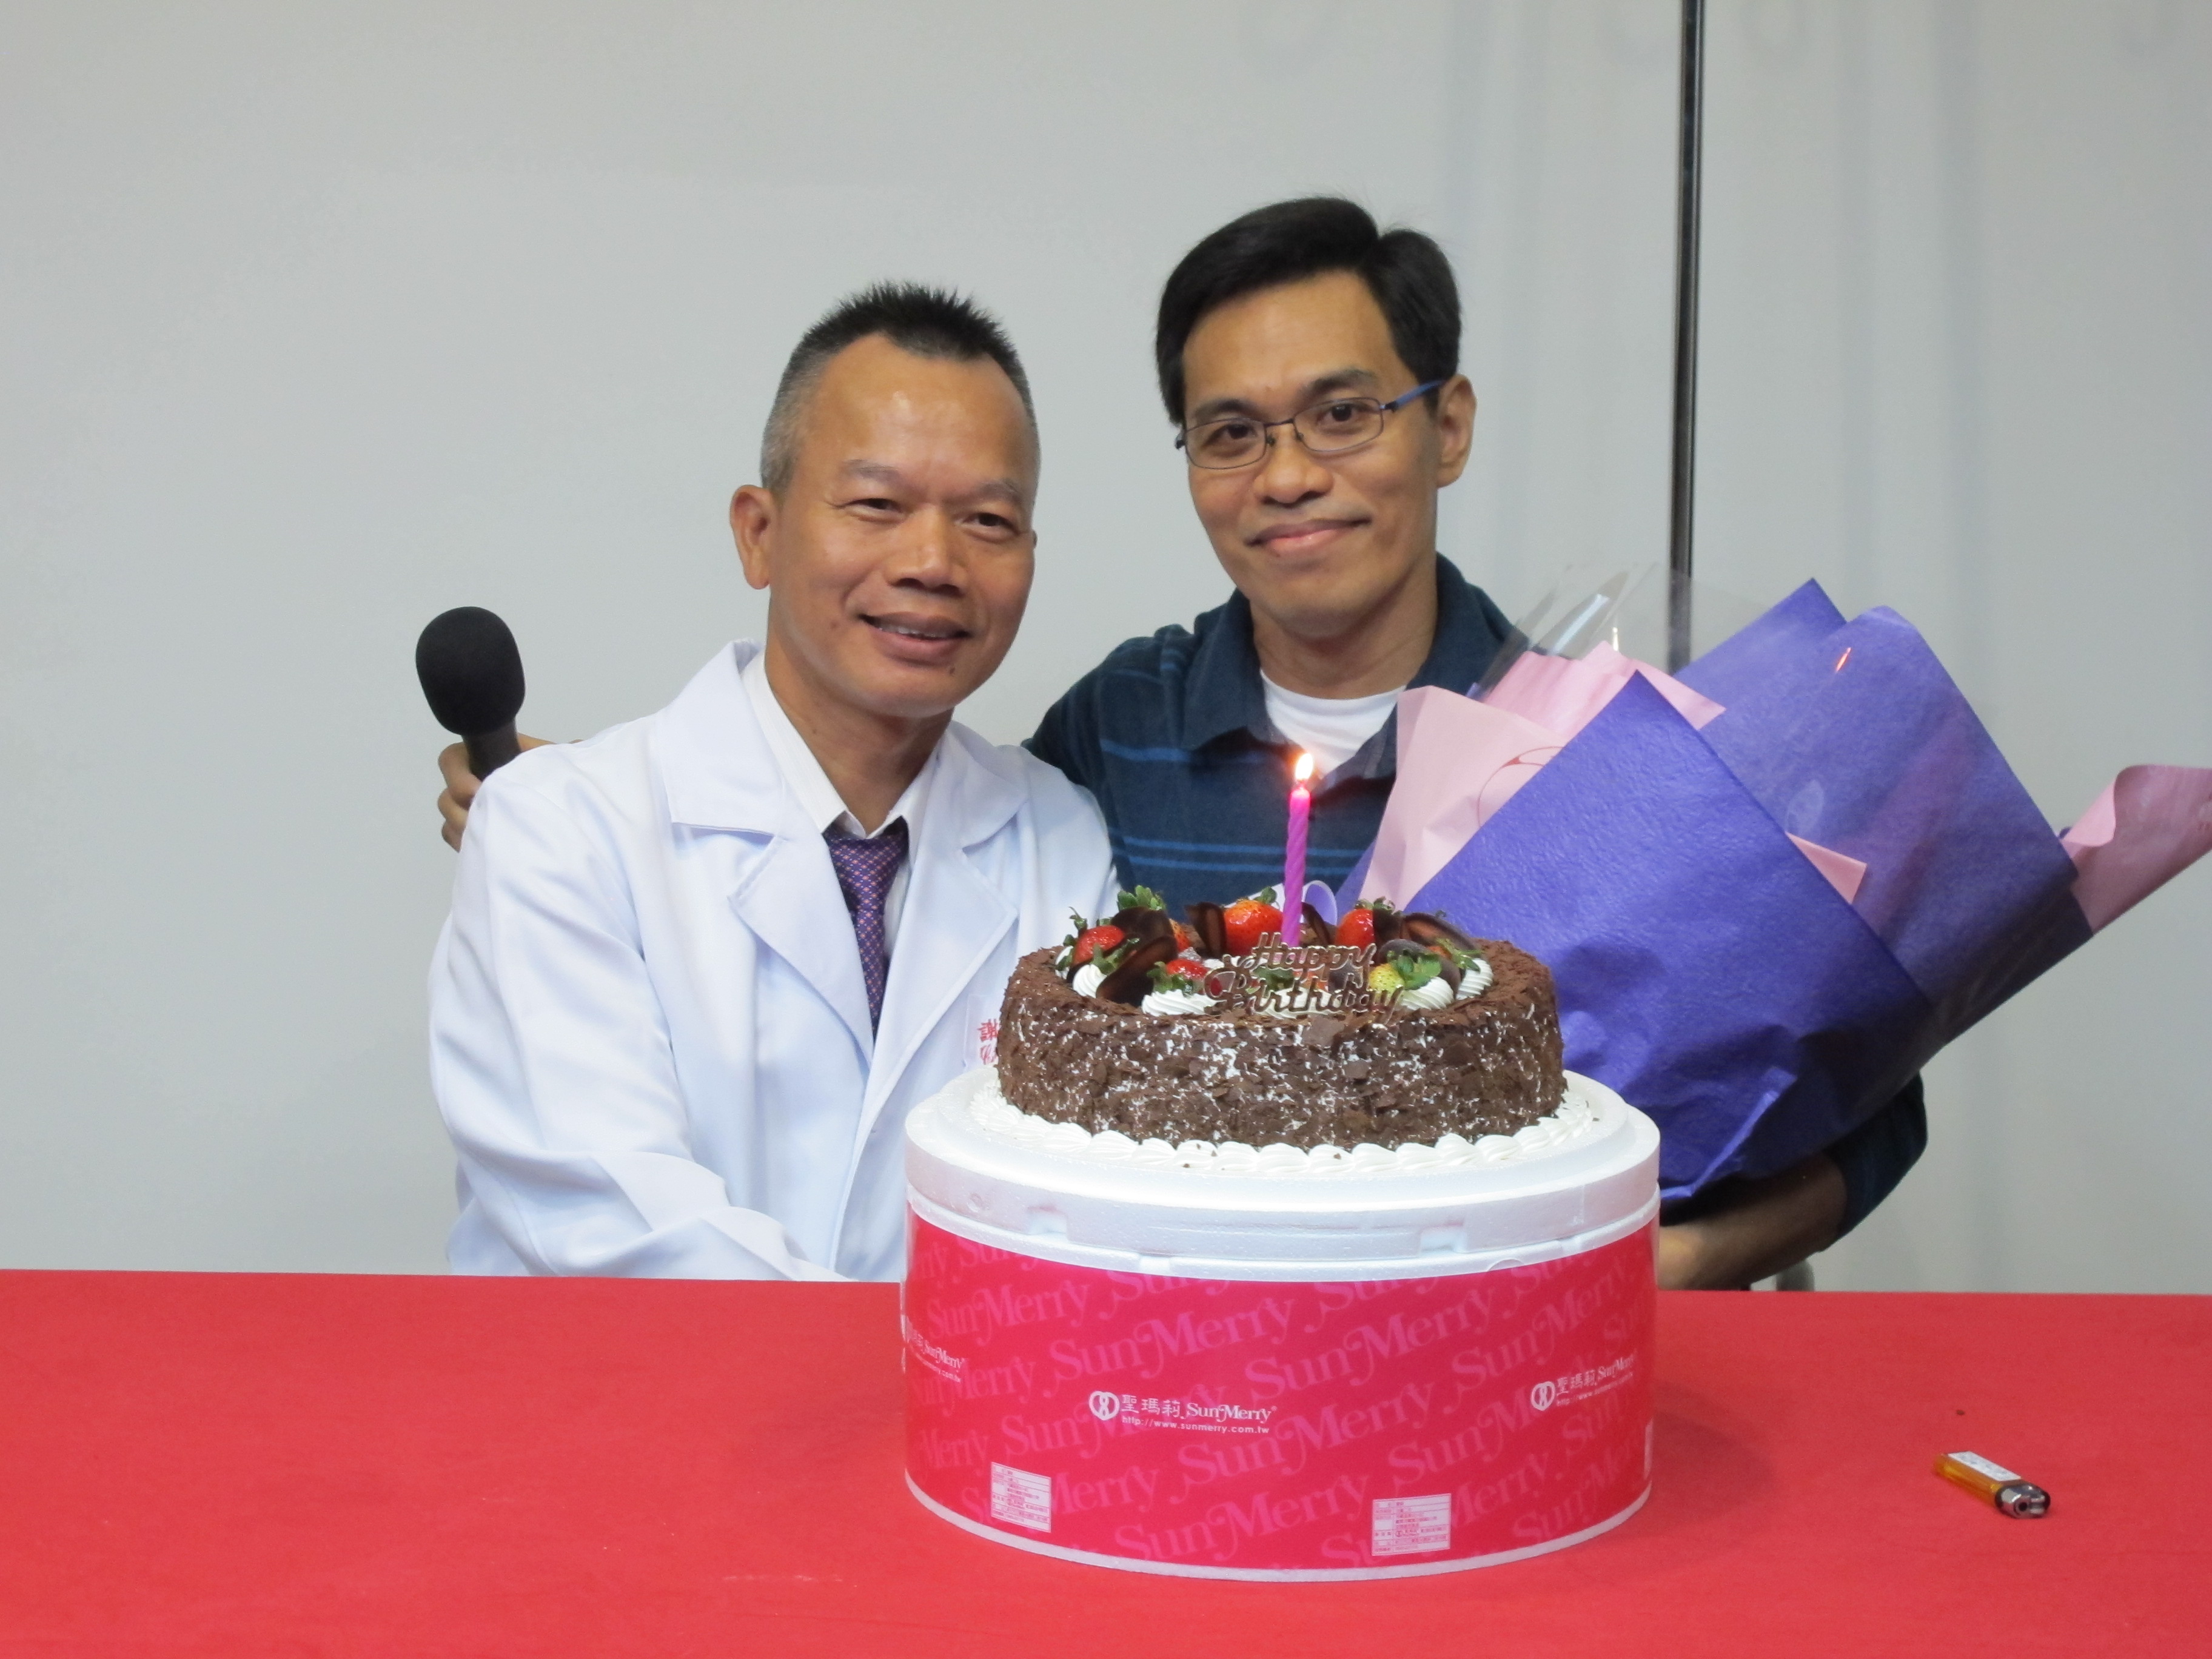 Medical Services without borders – Tri-Service General Hospital successfully treated a Pathology Professor from the Philippines who had giant hepatic hemangioma.